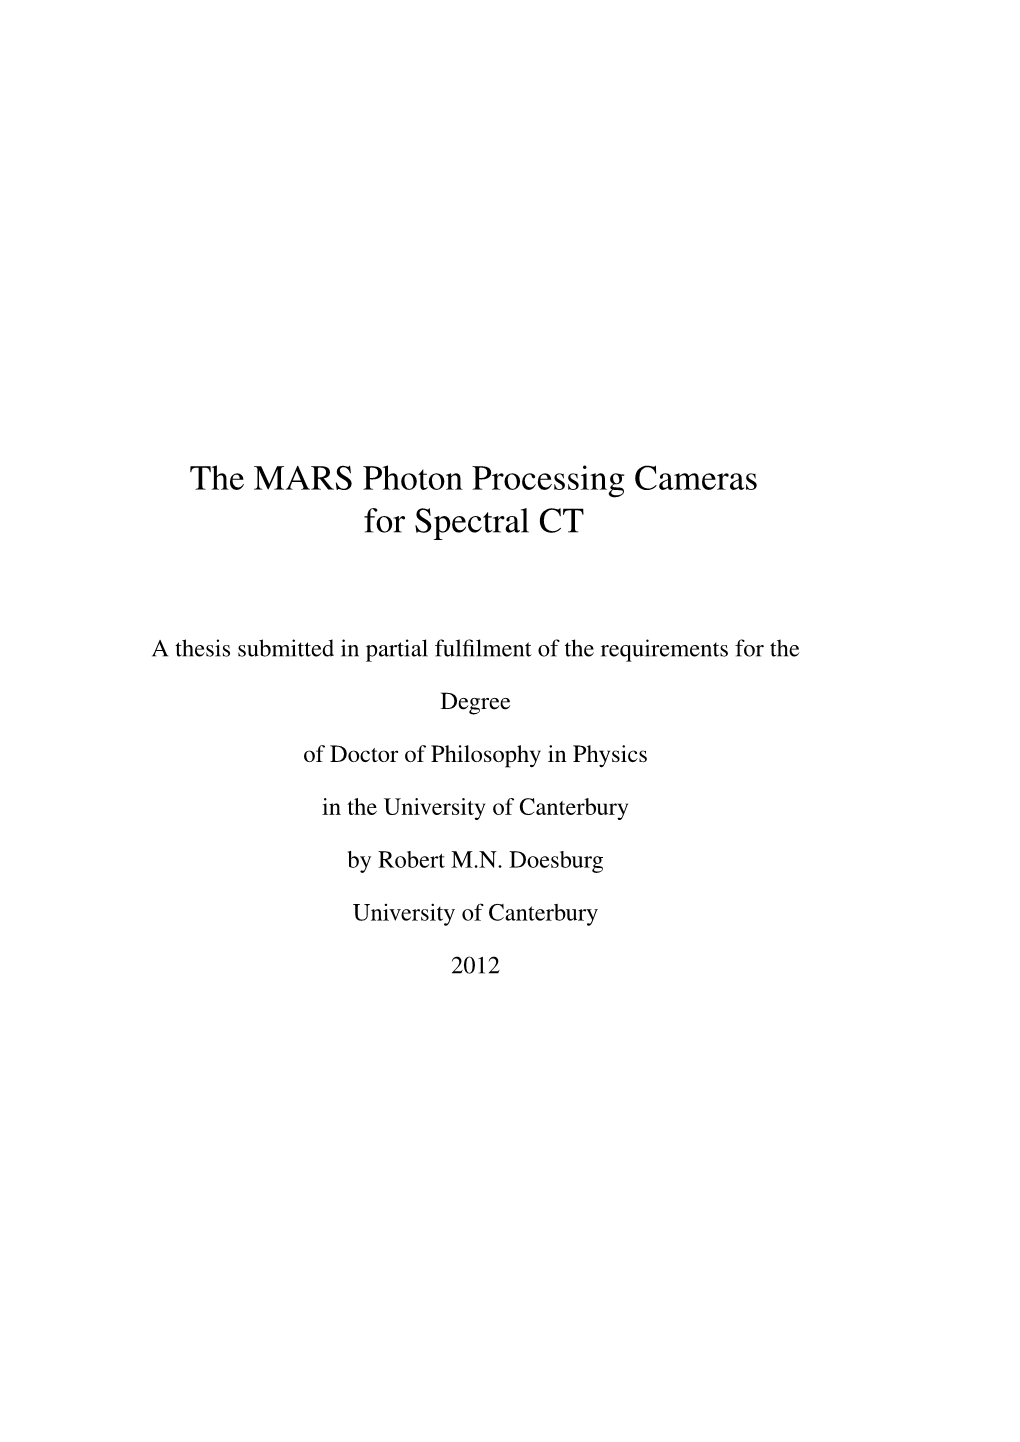 The MARS Photon Processing Cameras for Spectral CT